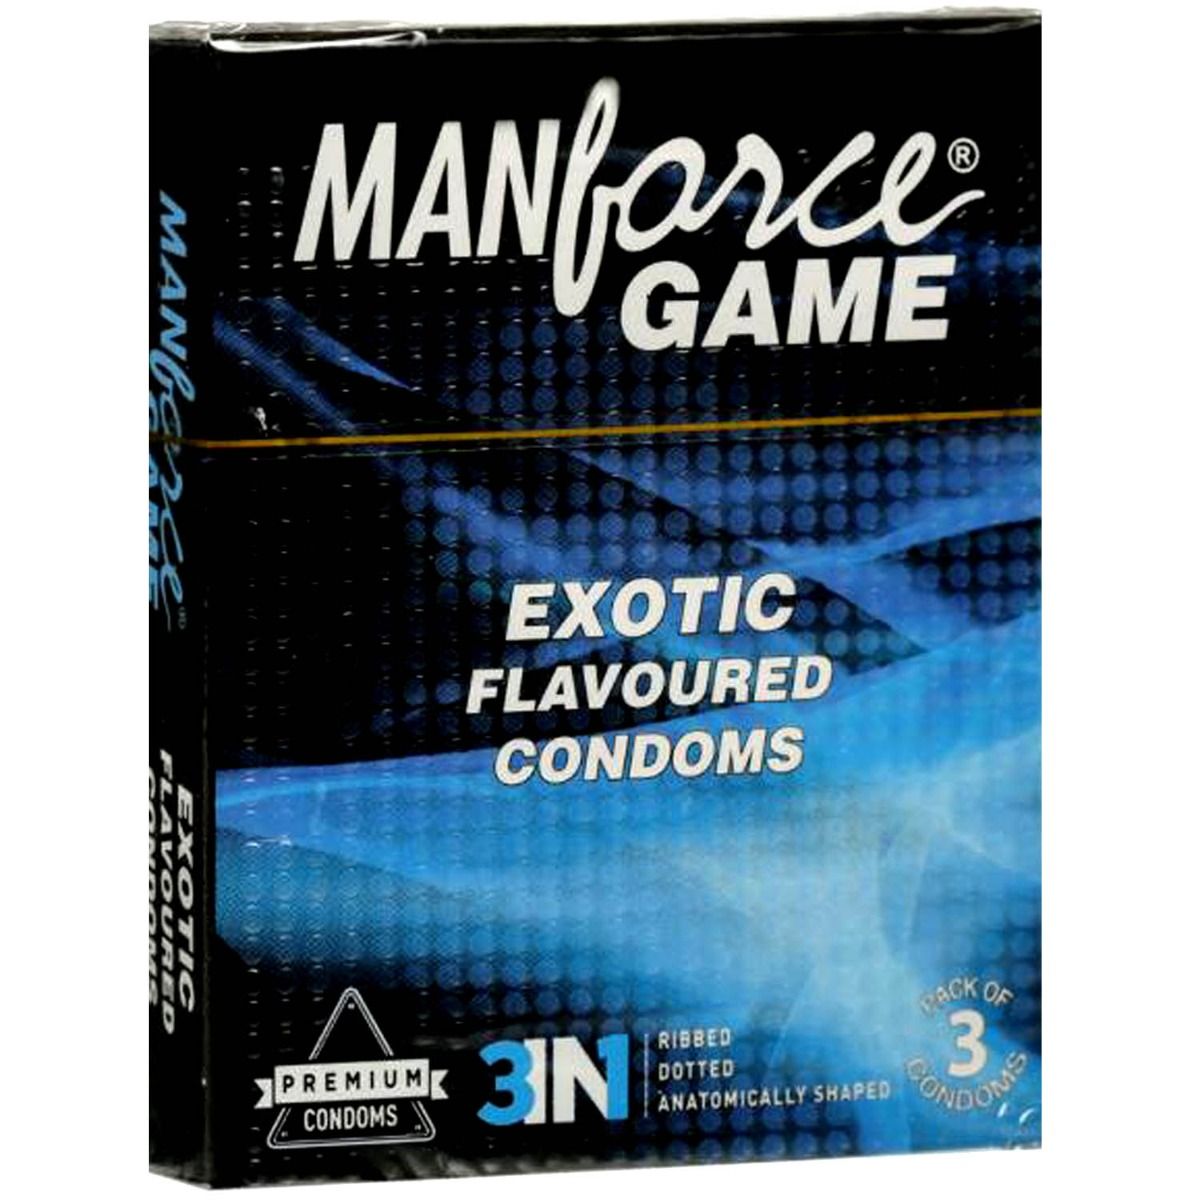 Buy Manforce Game Exotic Flavoured Condoms, 3 Count Online